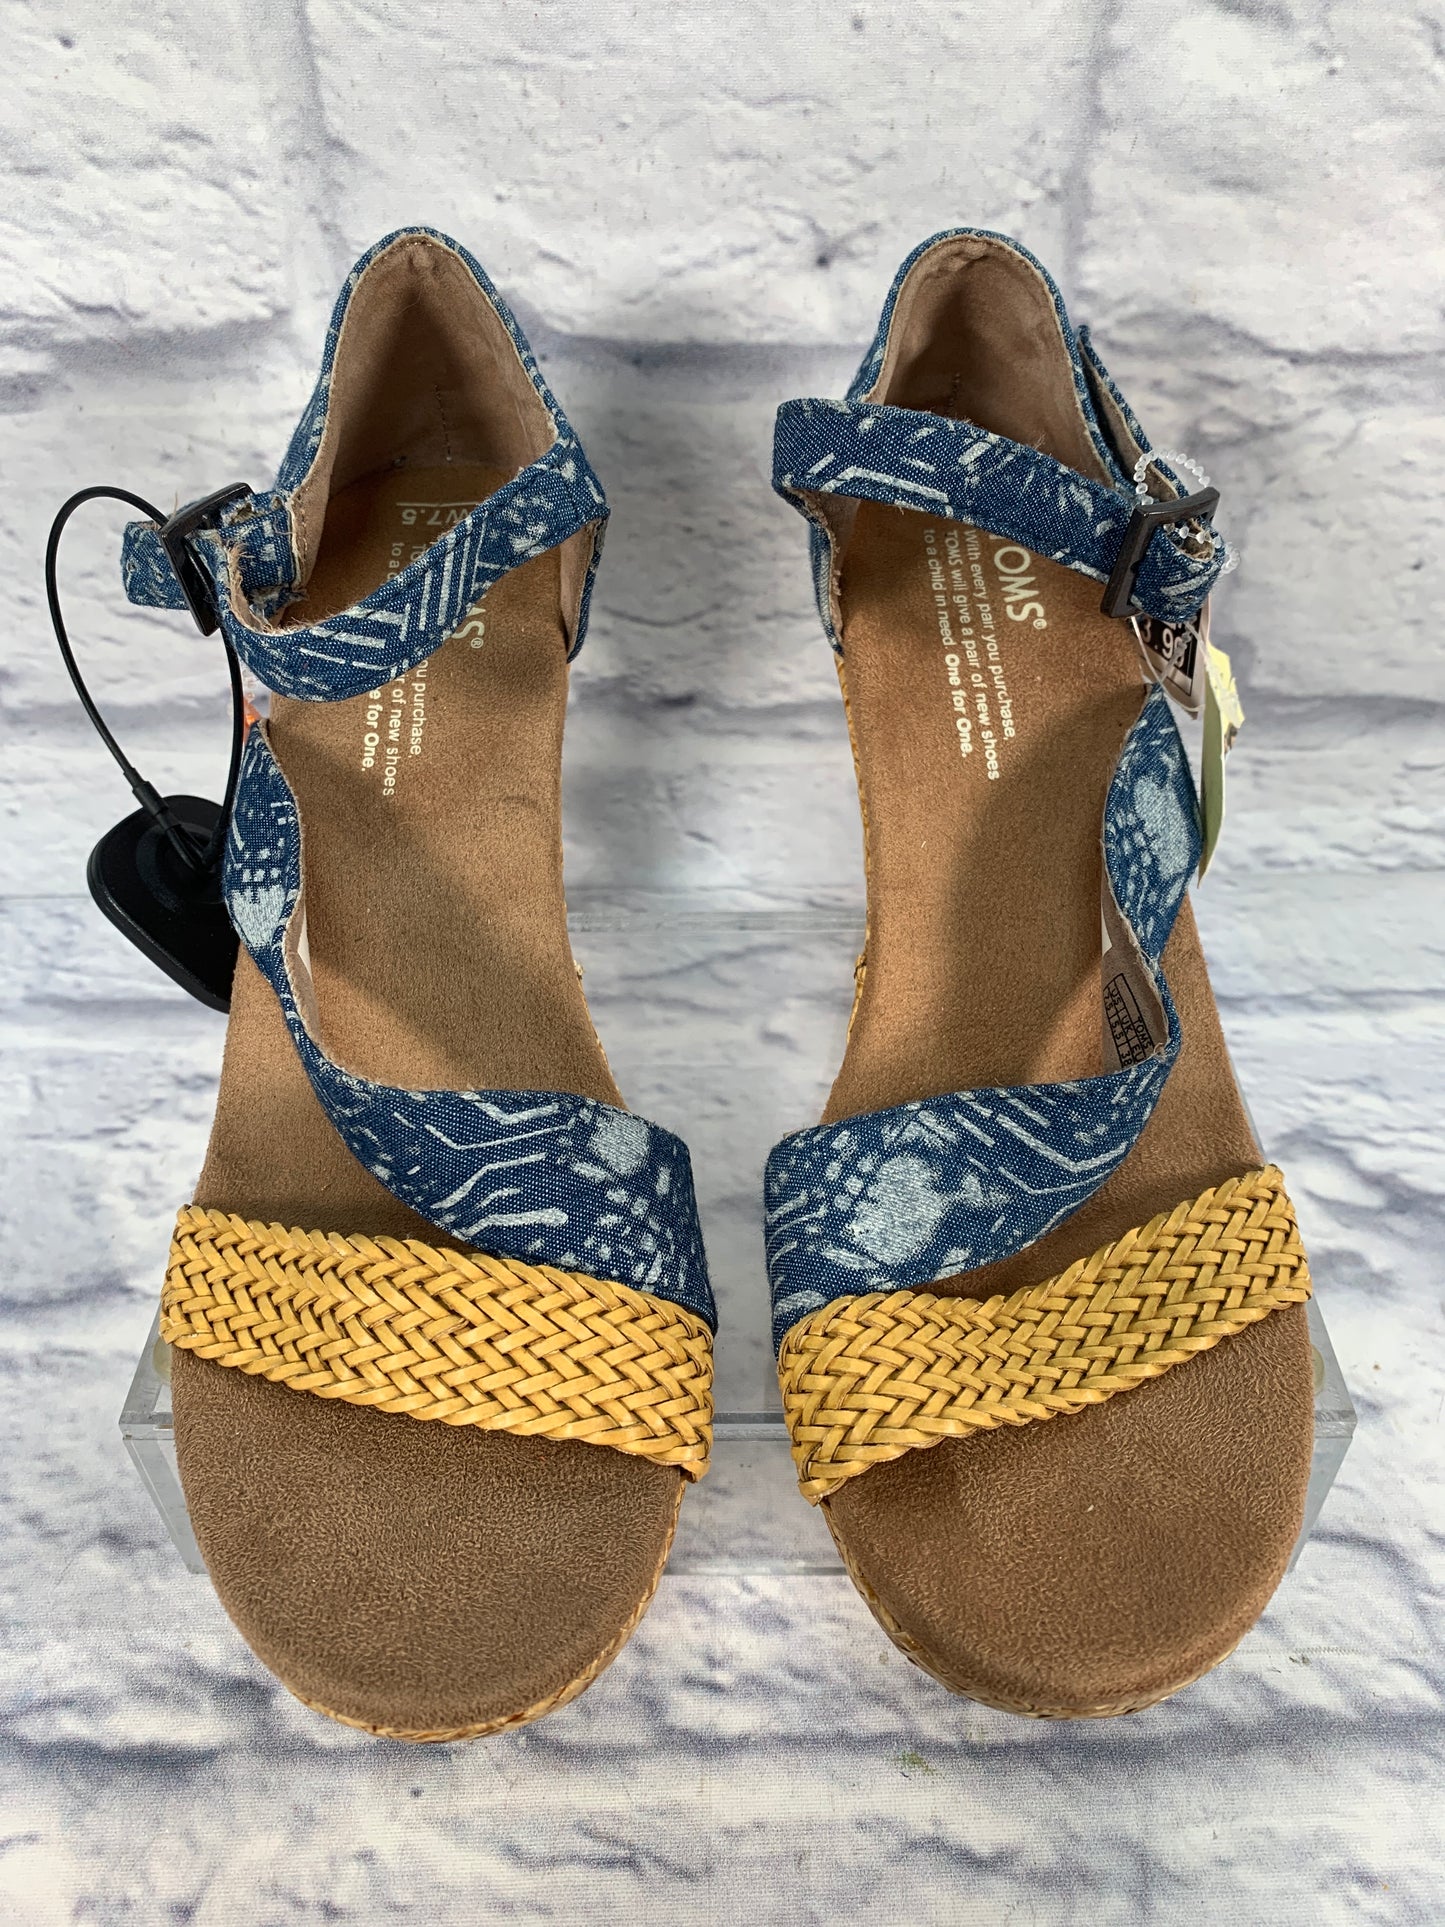 Sandals Heels Wedge By Toms  Size: 7.5